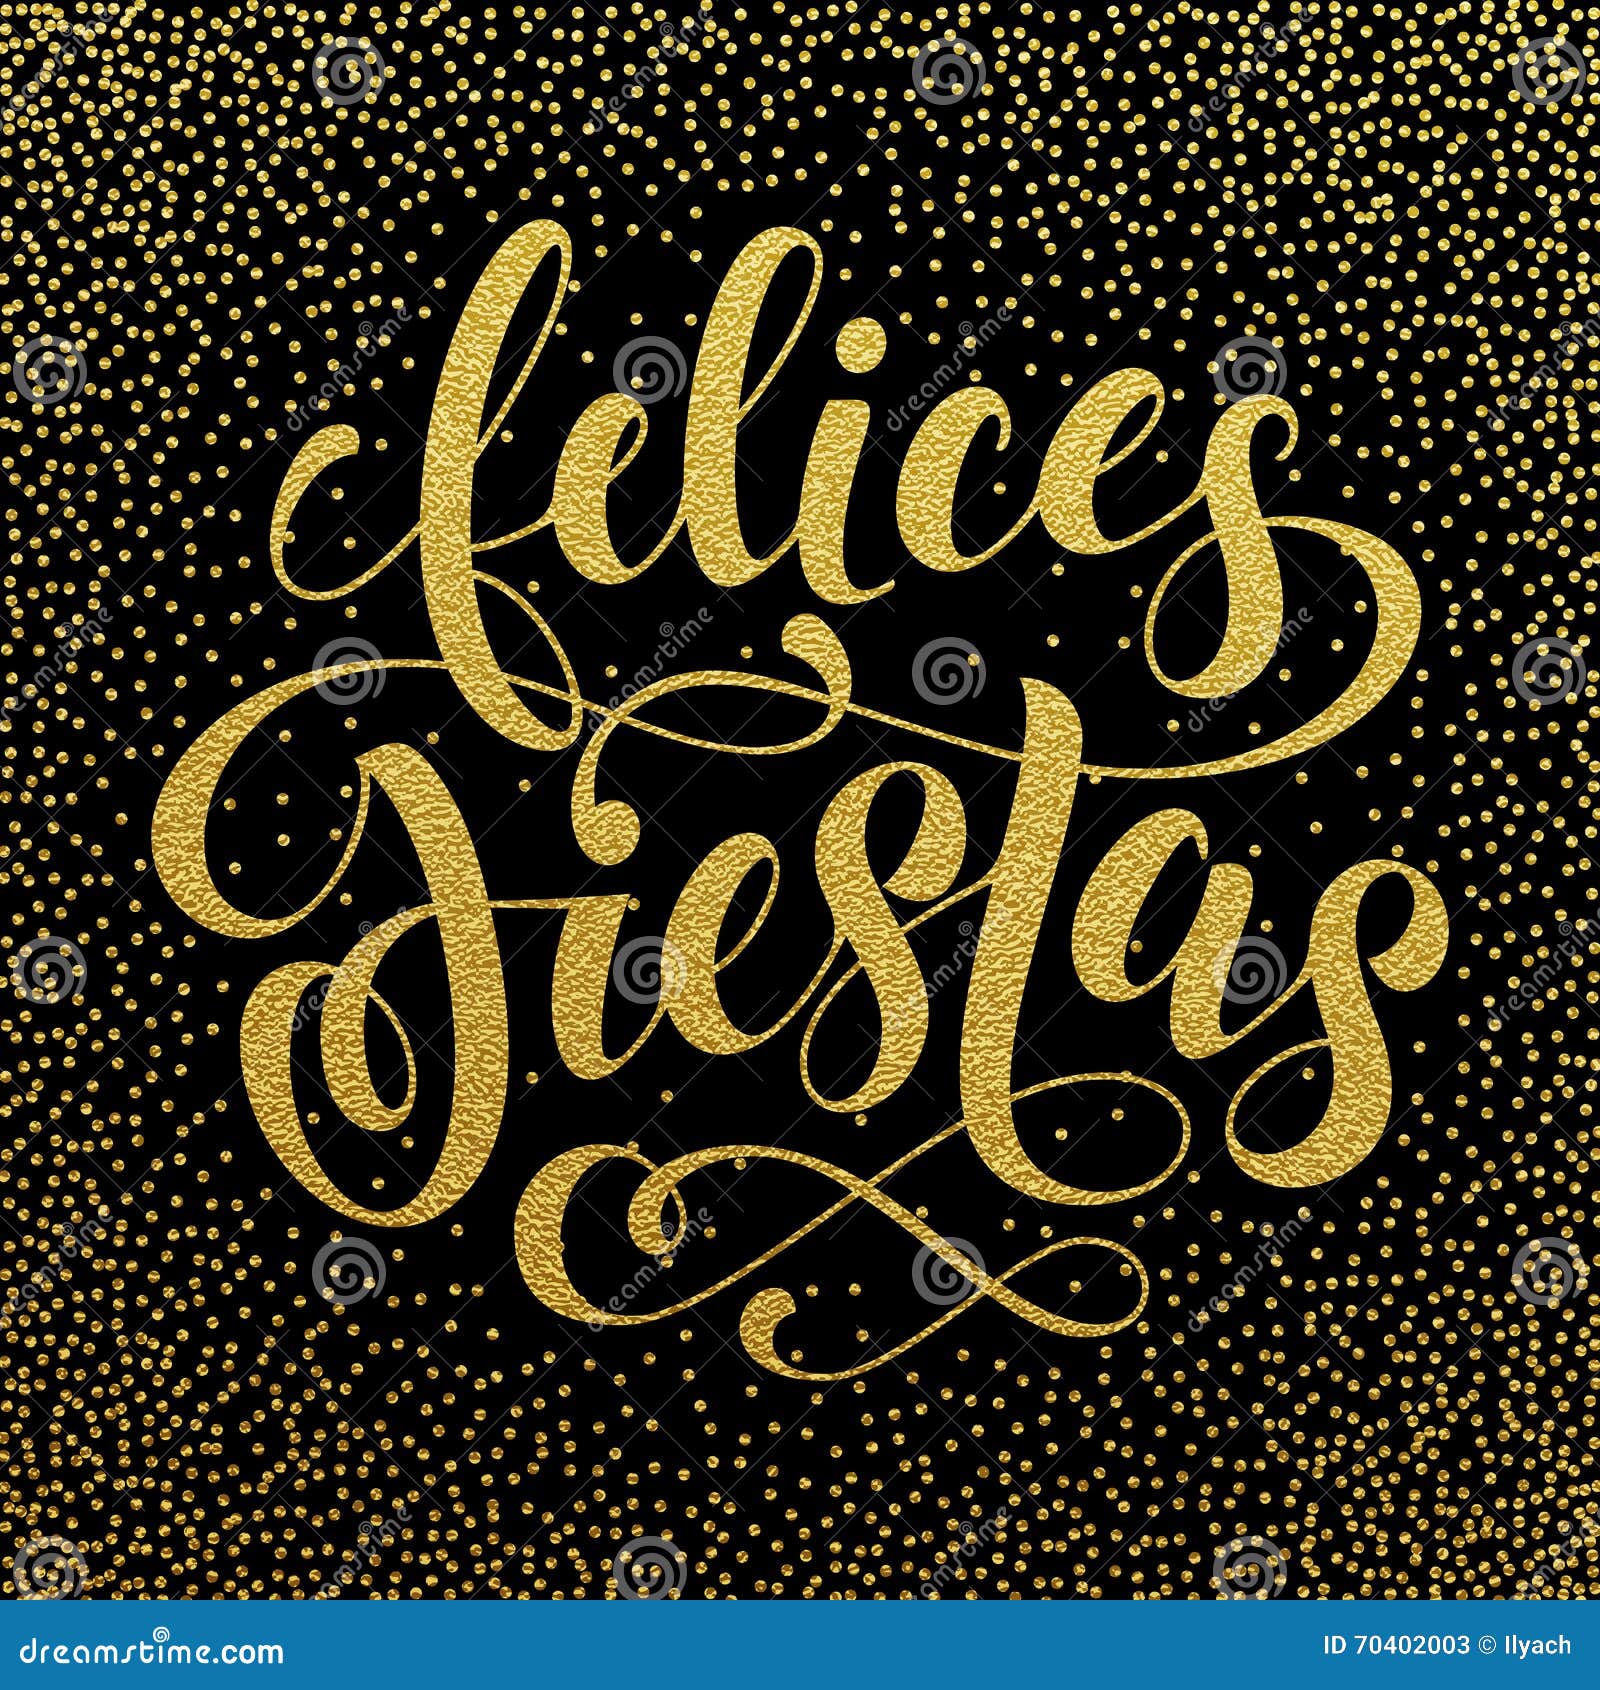 felices fiestas spanish text for greeting card, invitation